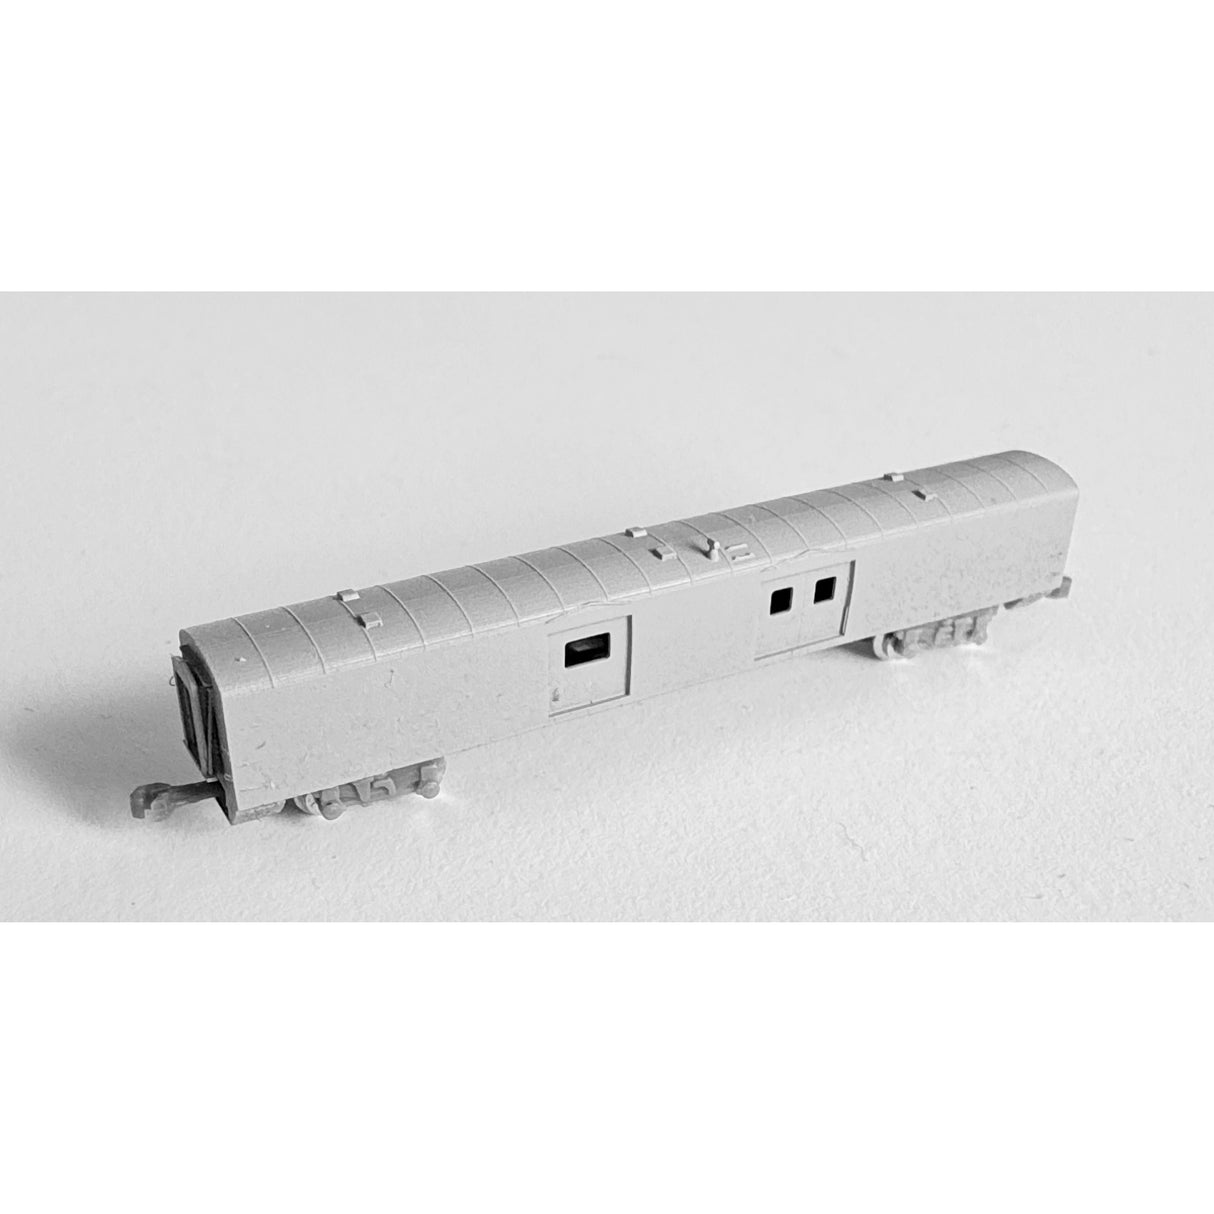 CCE Models T Scale (1:450) CN Baggage Car shell kit